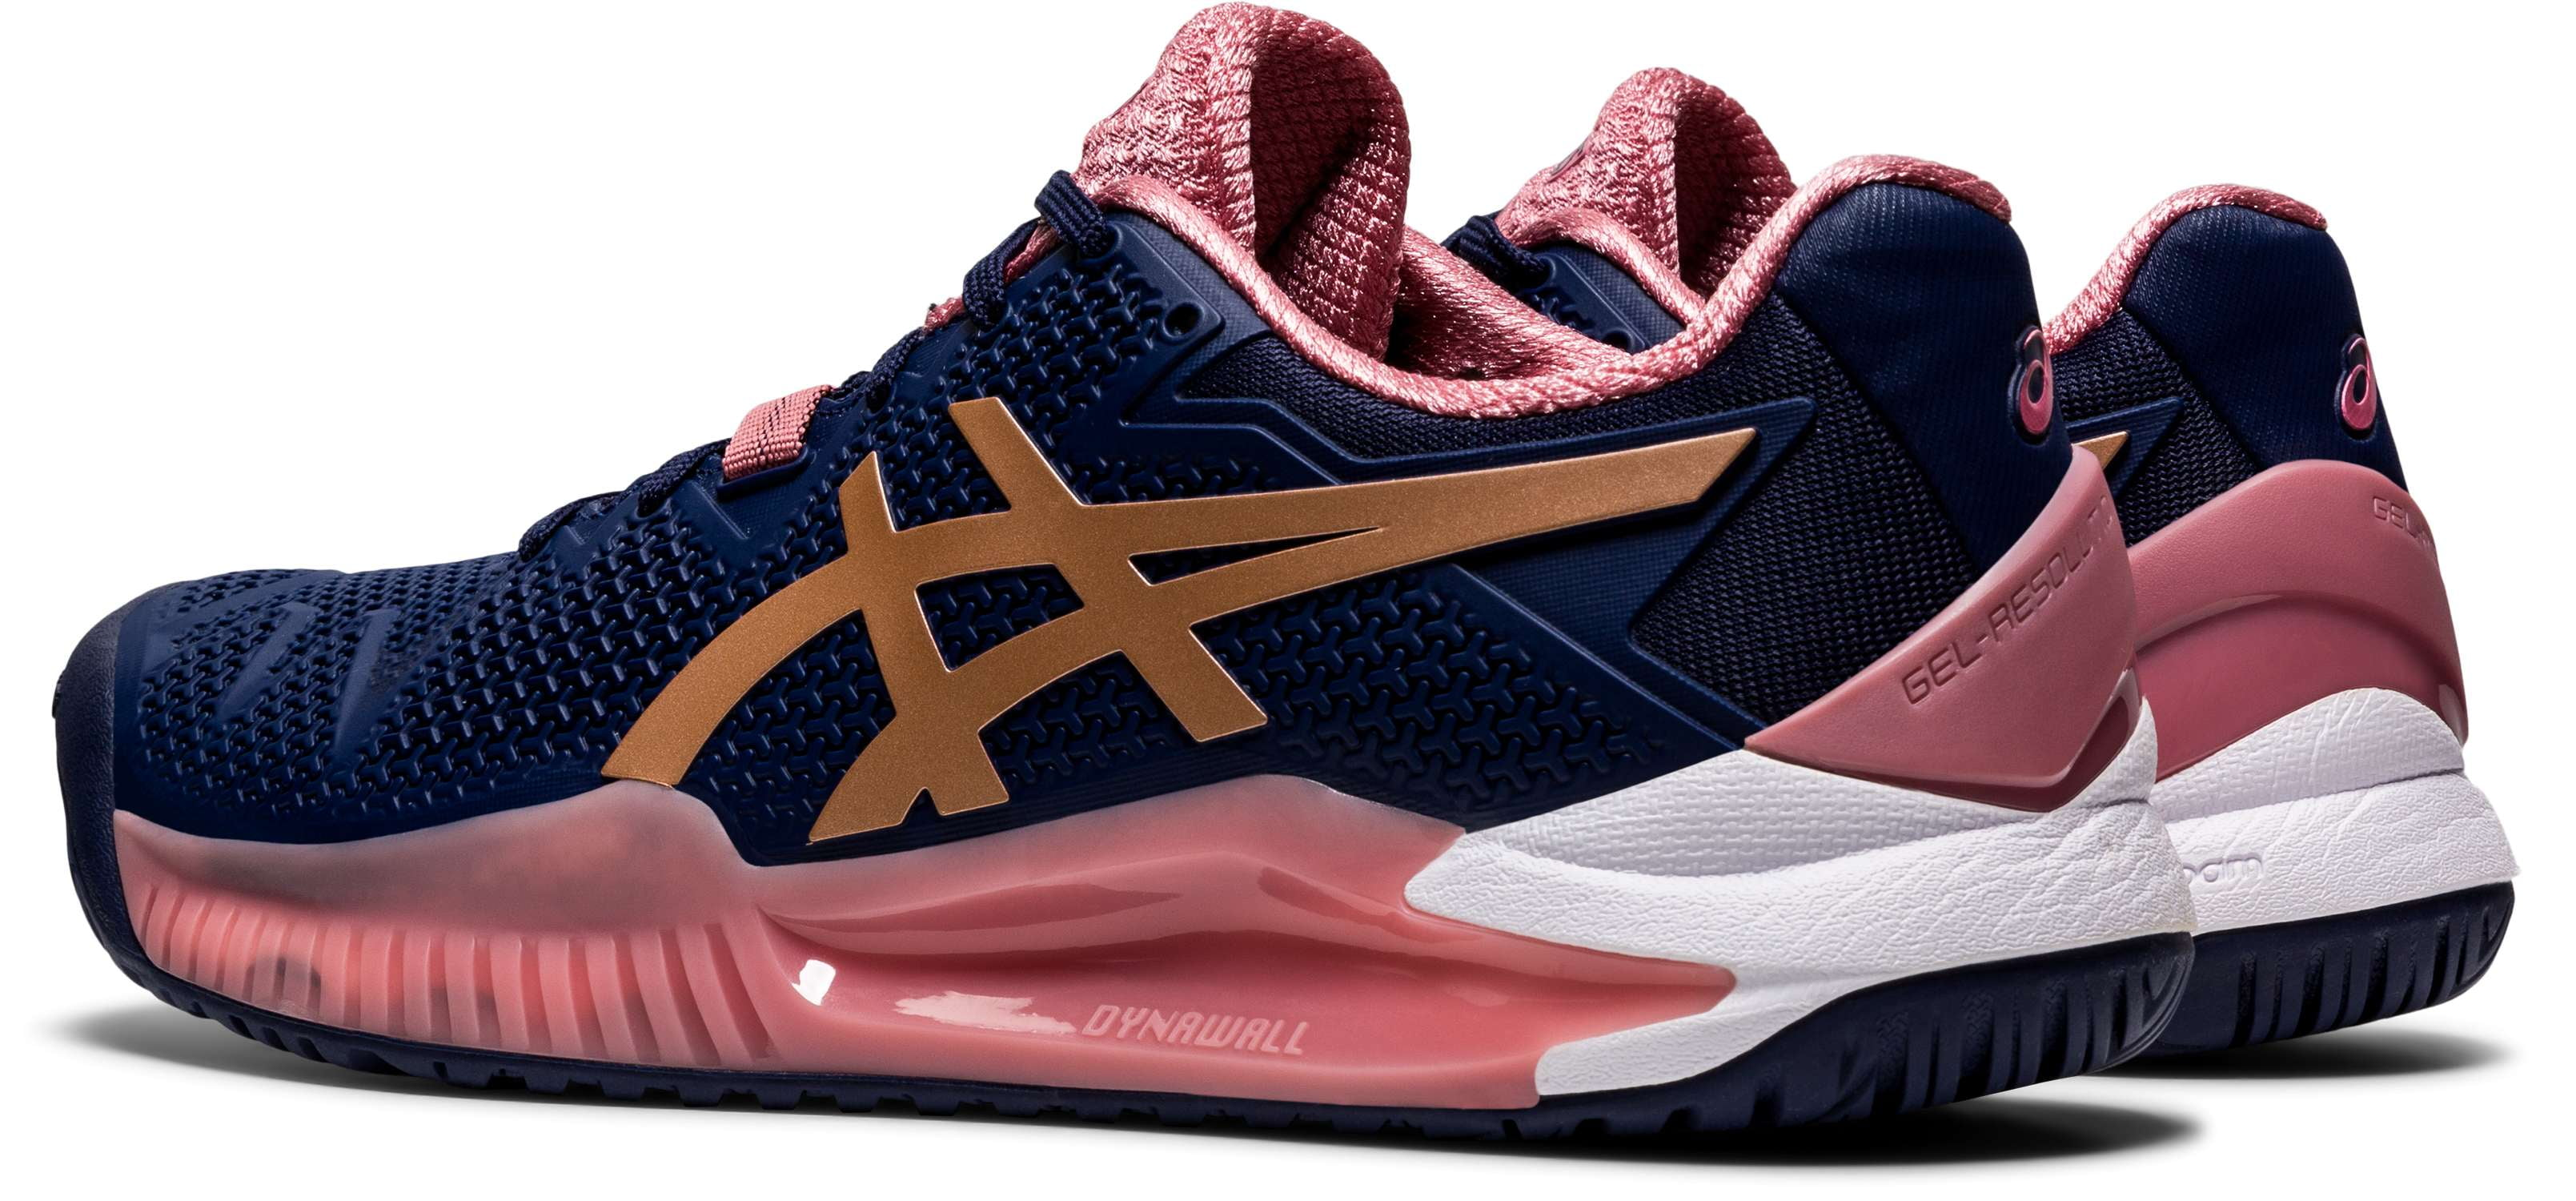 Asics Gel Resolution 8 Womens Shoes (Peacoat-Rose Gold